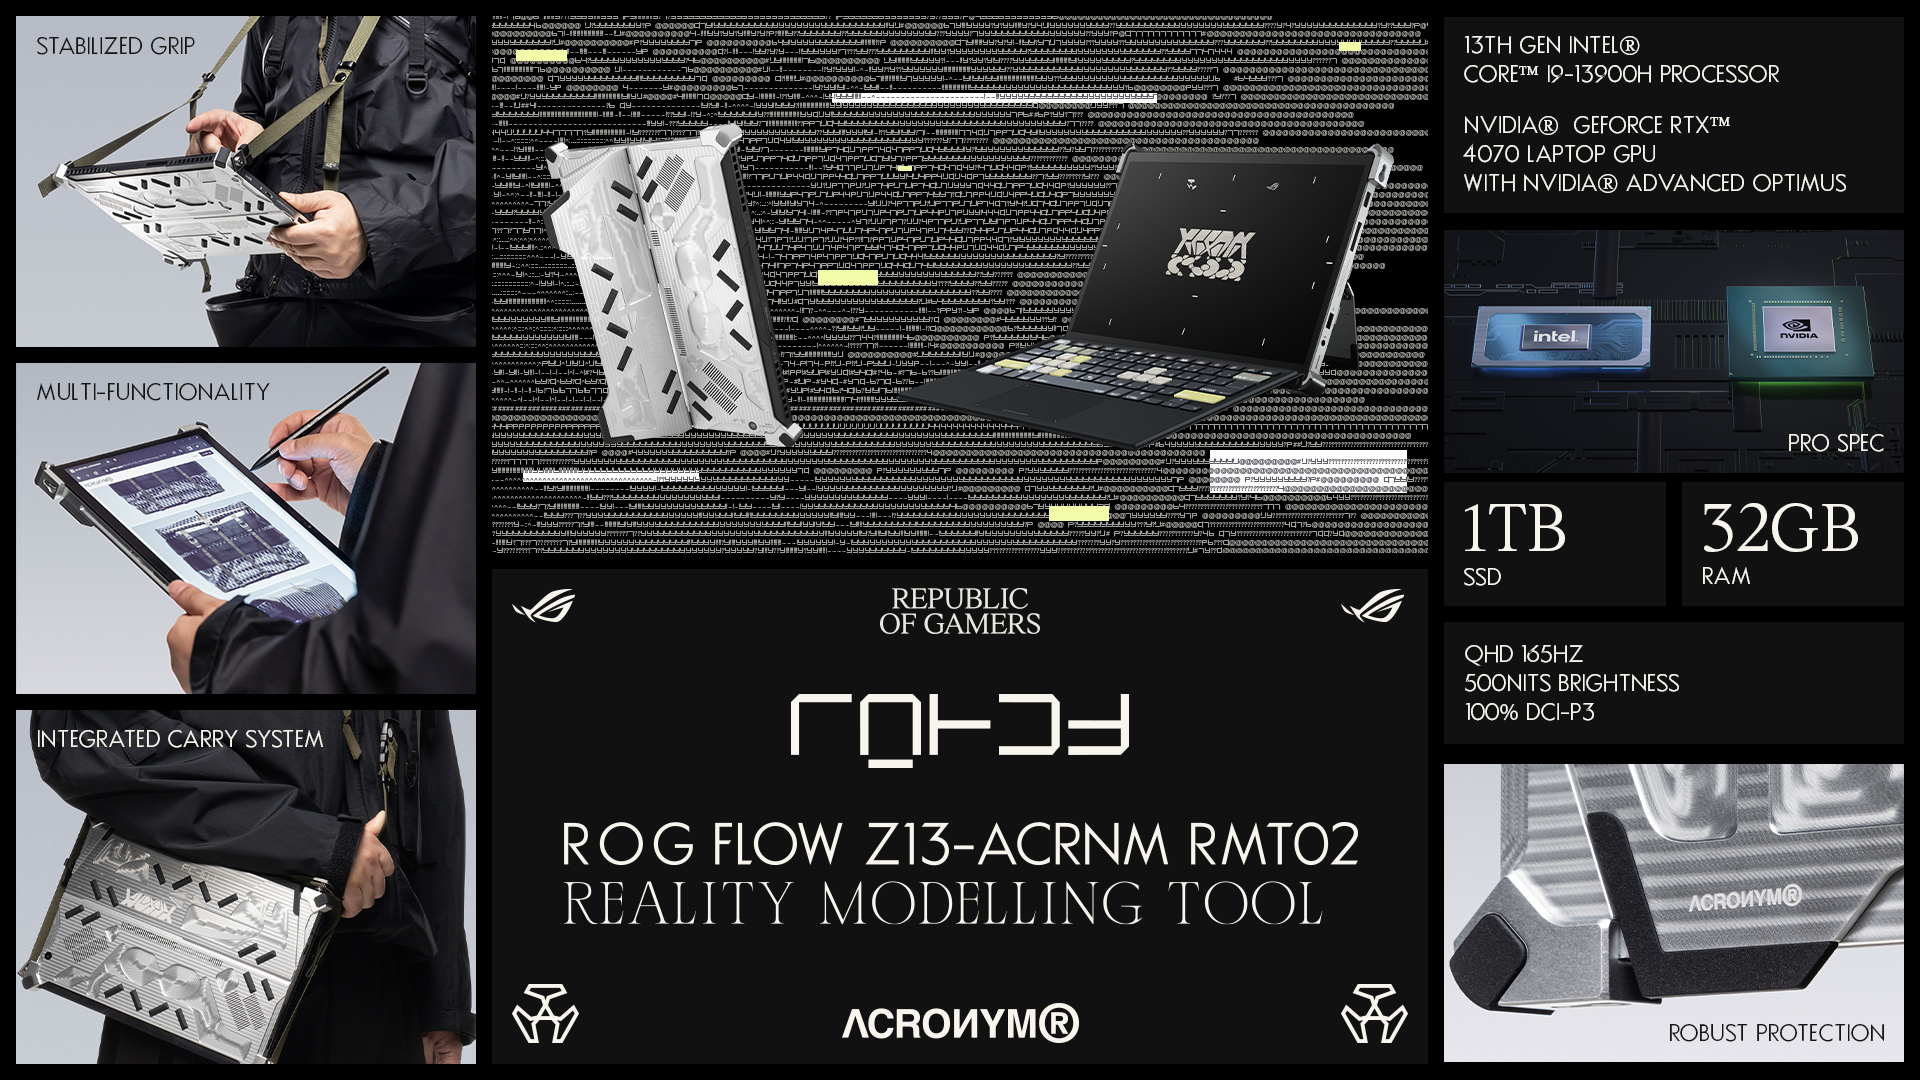 Limited Edition ASUS ROG Flow Z13-ACRMN RMT02 Now Available With Exclusive Design 28